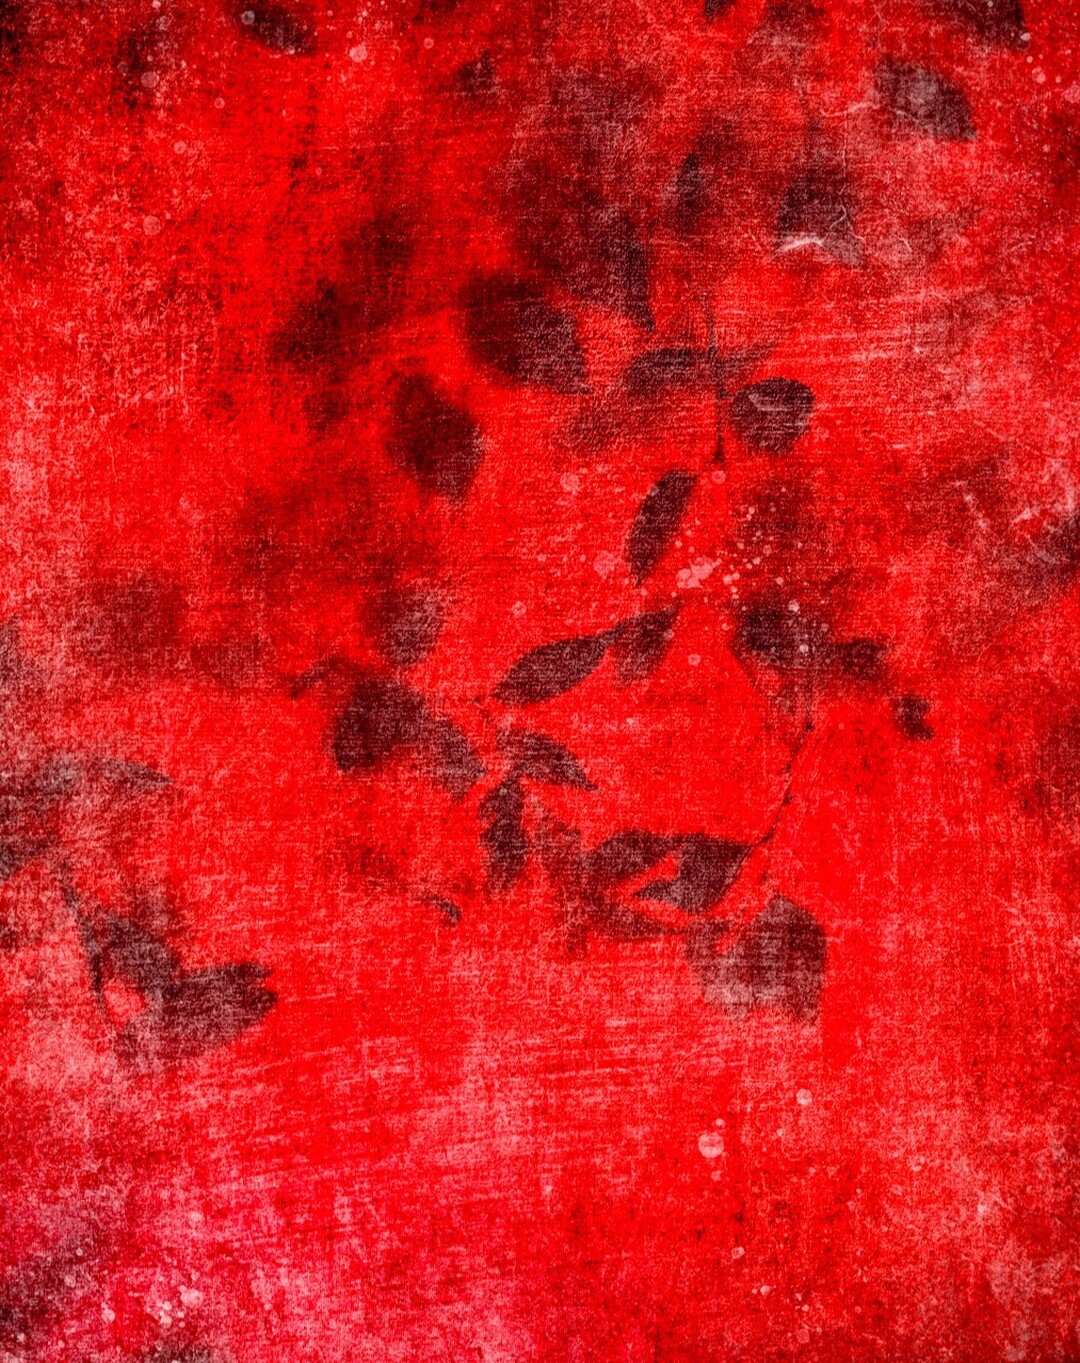 The hidden harmony is better than the obvious. ~ Heraclitus (&quot;Through the Red Umbrella&quot;)
.
#ig_artistry #fineartphotography #camerapainting #paintingwithcamera #photomontage #photoshop #colors #contemporaryartist #textured #artistry_flair #